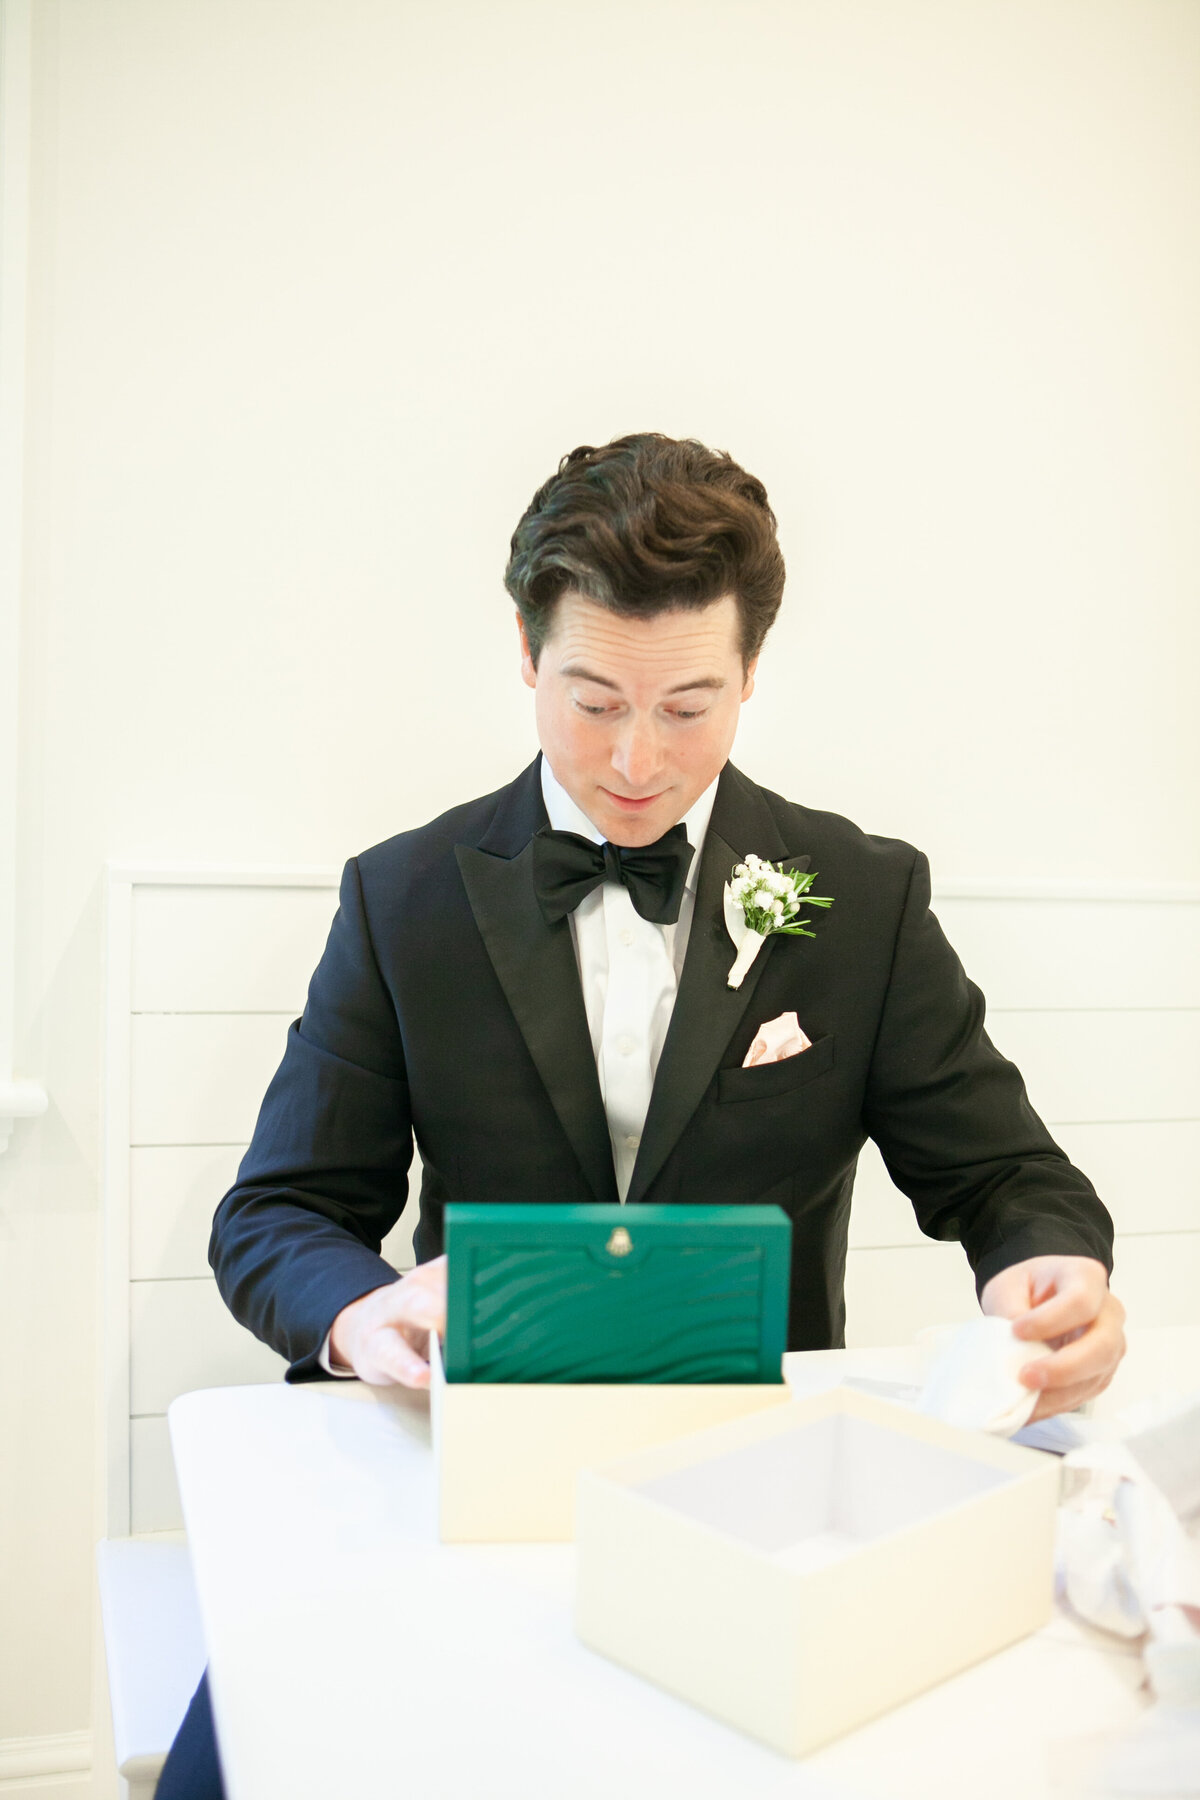 Groom reading his gift from bride